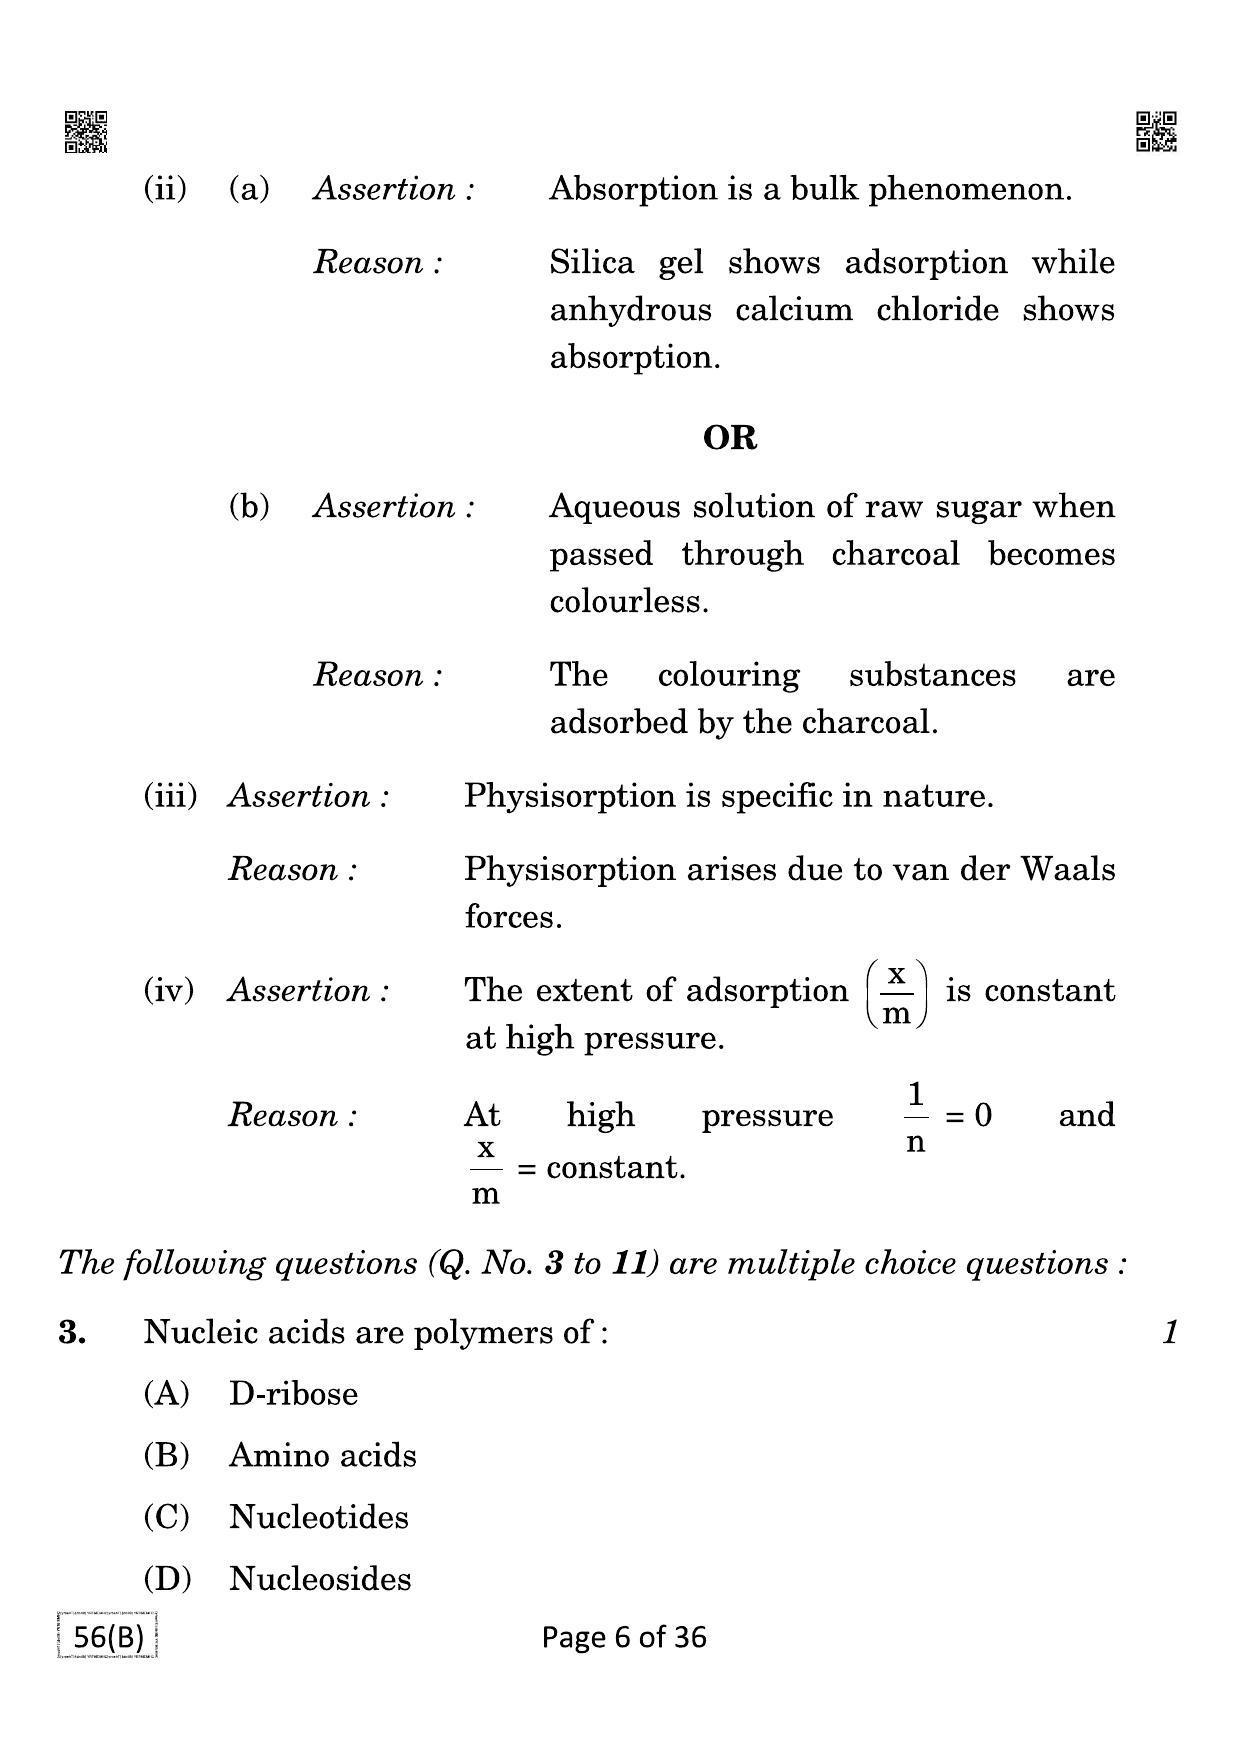 CBSE Class 12 QP_043_CHEMISTRY_FOR_BLIND_CANDIDATES 2021 Compartment Question Paper - Page 6